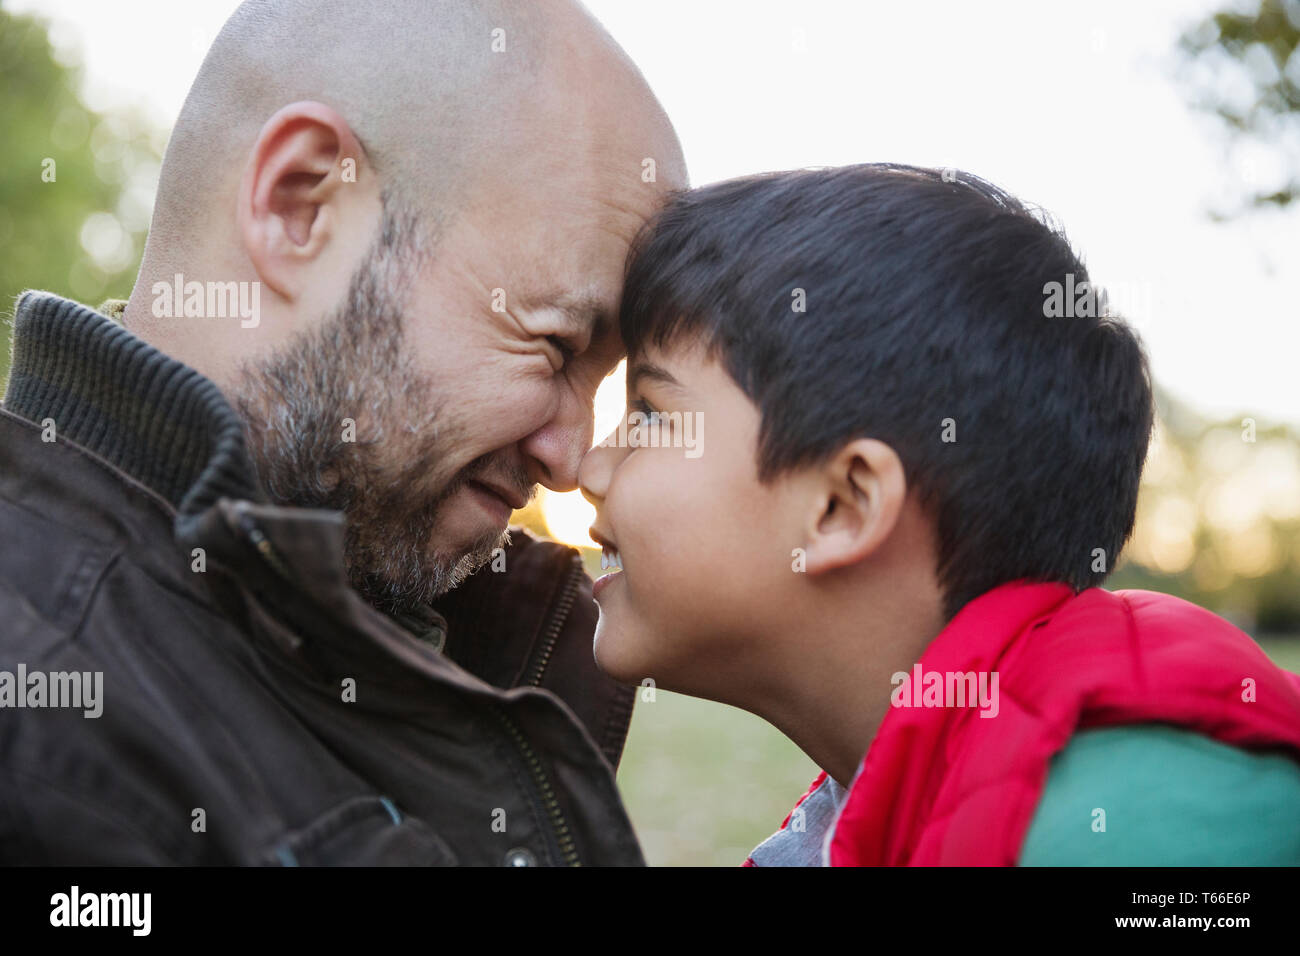 Affectionate father and son rubbing noses Stock Photo